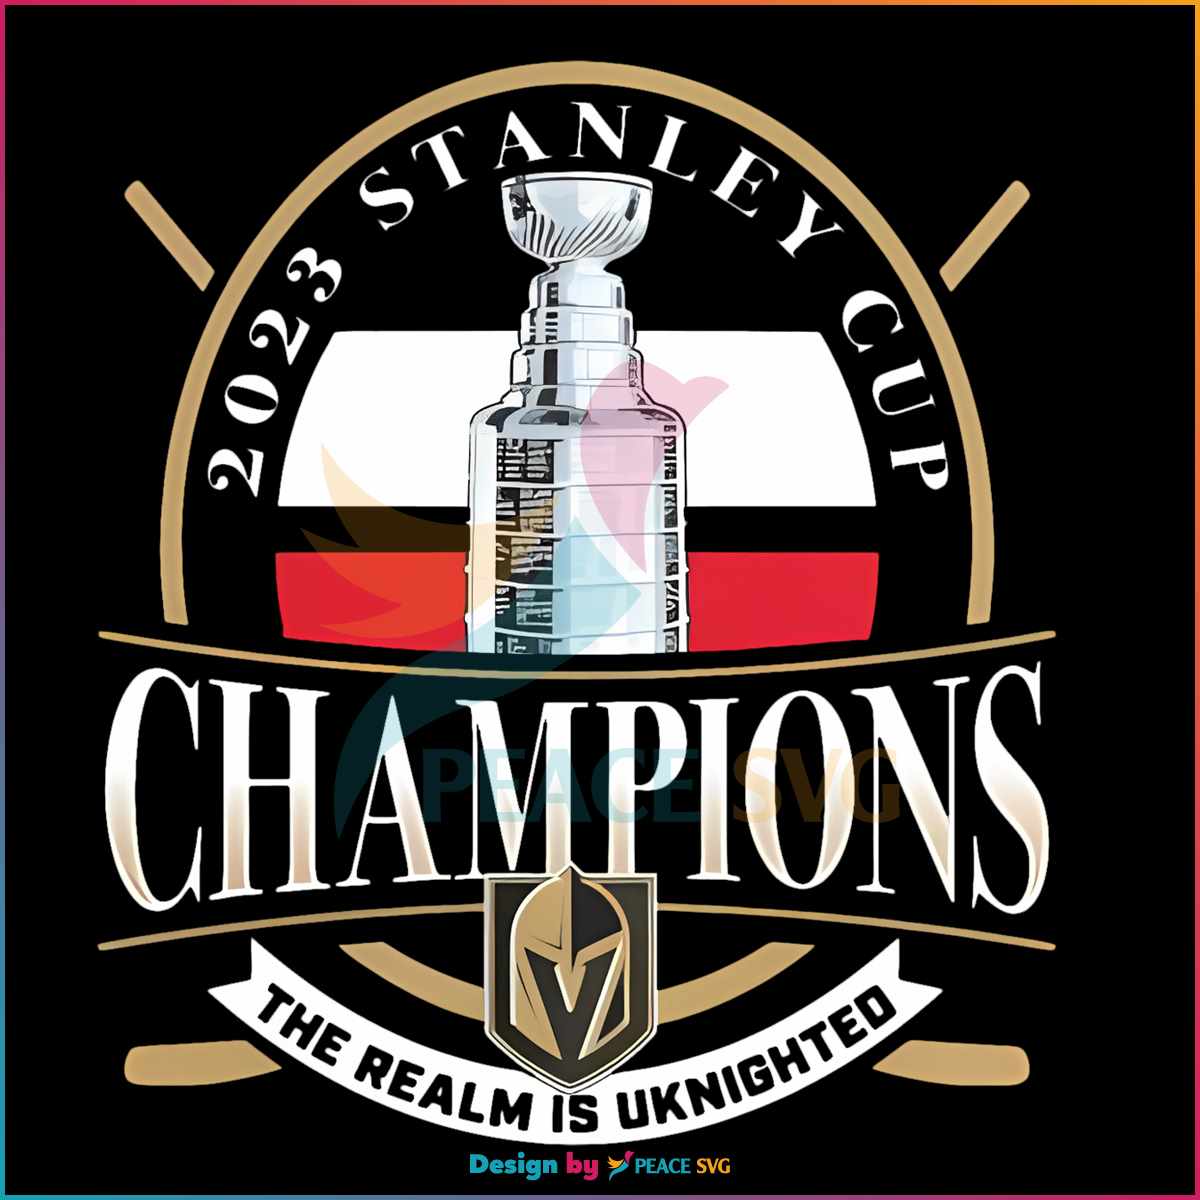 vegas-golden-knights-the-realm-is-uknighted-svg-cricut-files